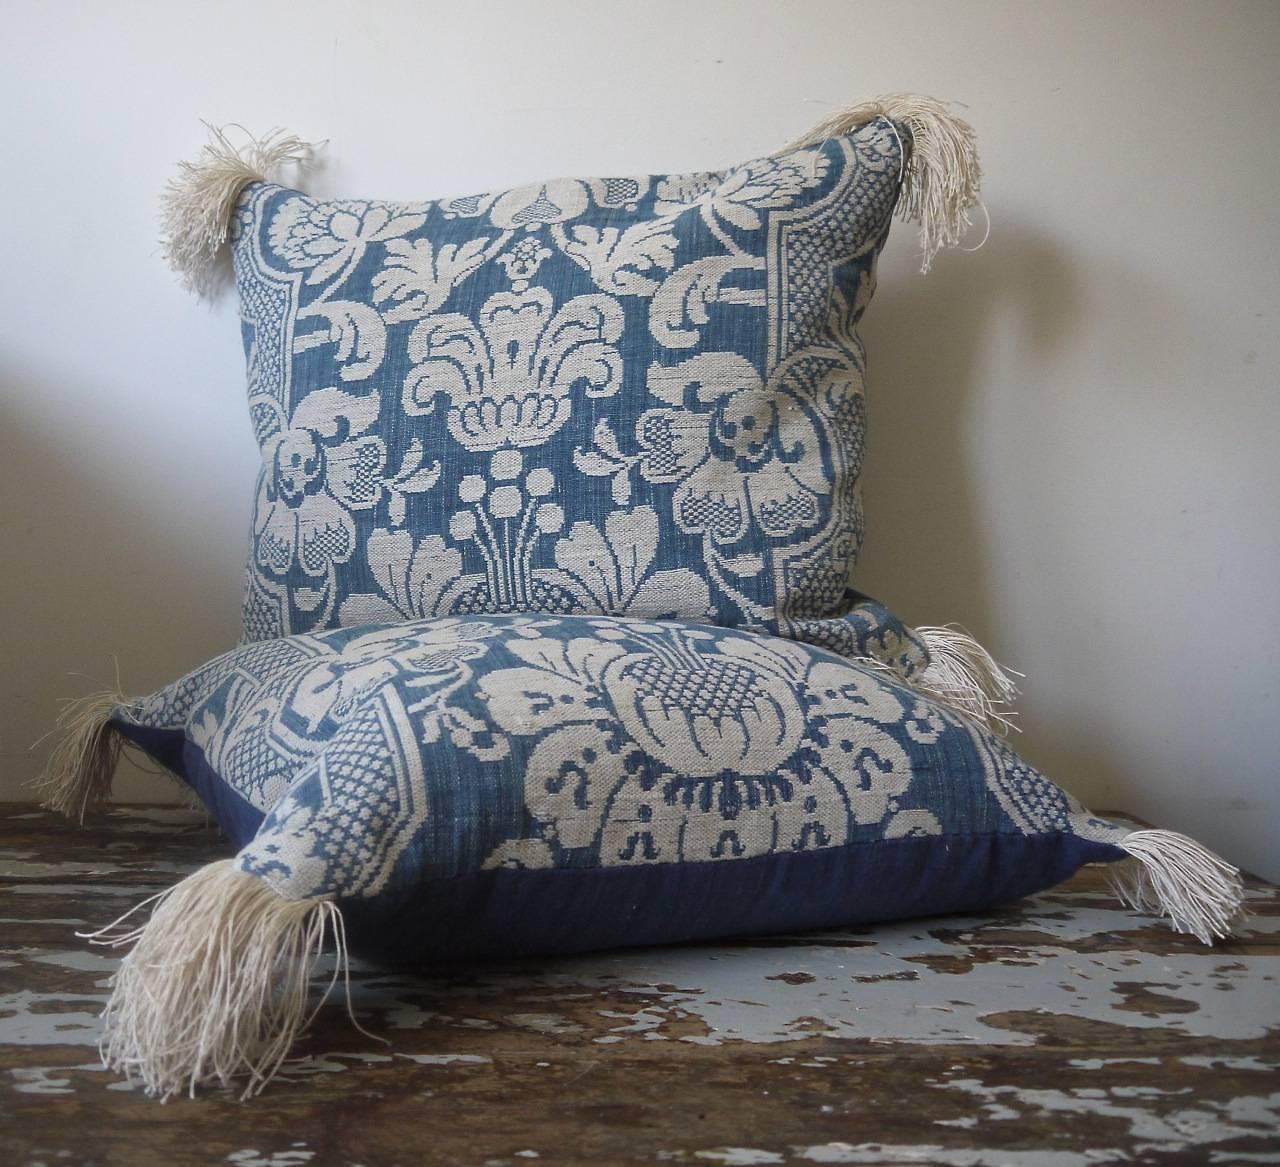 French, circa 1760s woven blue and white linen and cotton cushions. Wonderful texture and contrast of weaves and yarns. Antique French linen fringing at the corners and backed in a dyed 19th century, French linen. Slipstitched closed with a duck